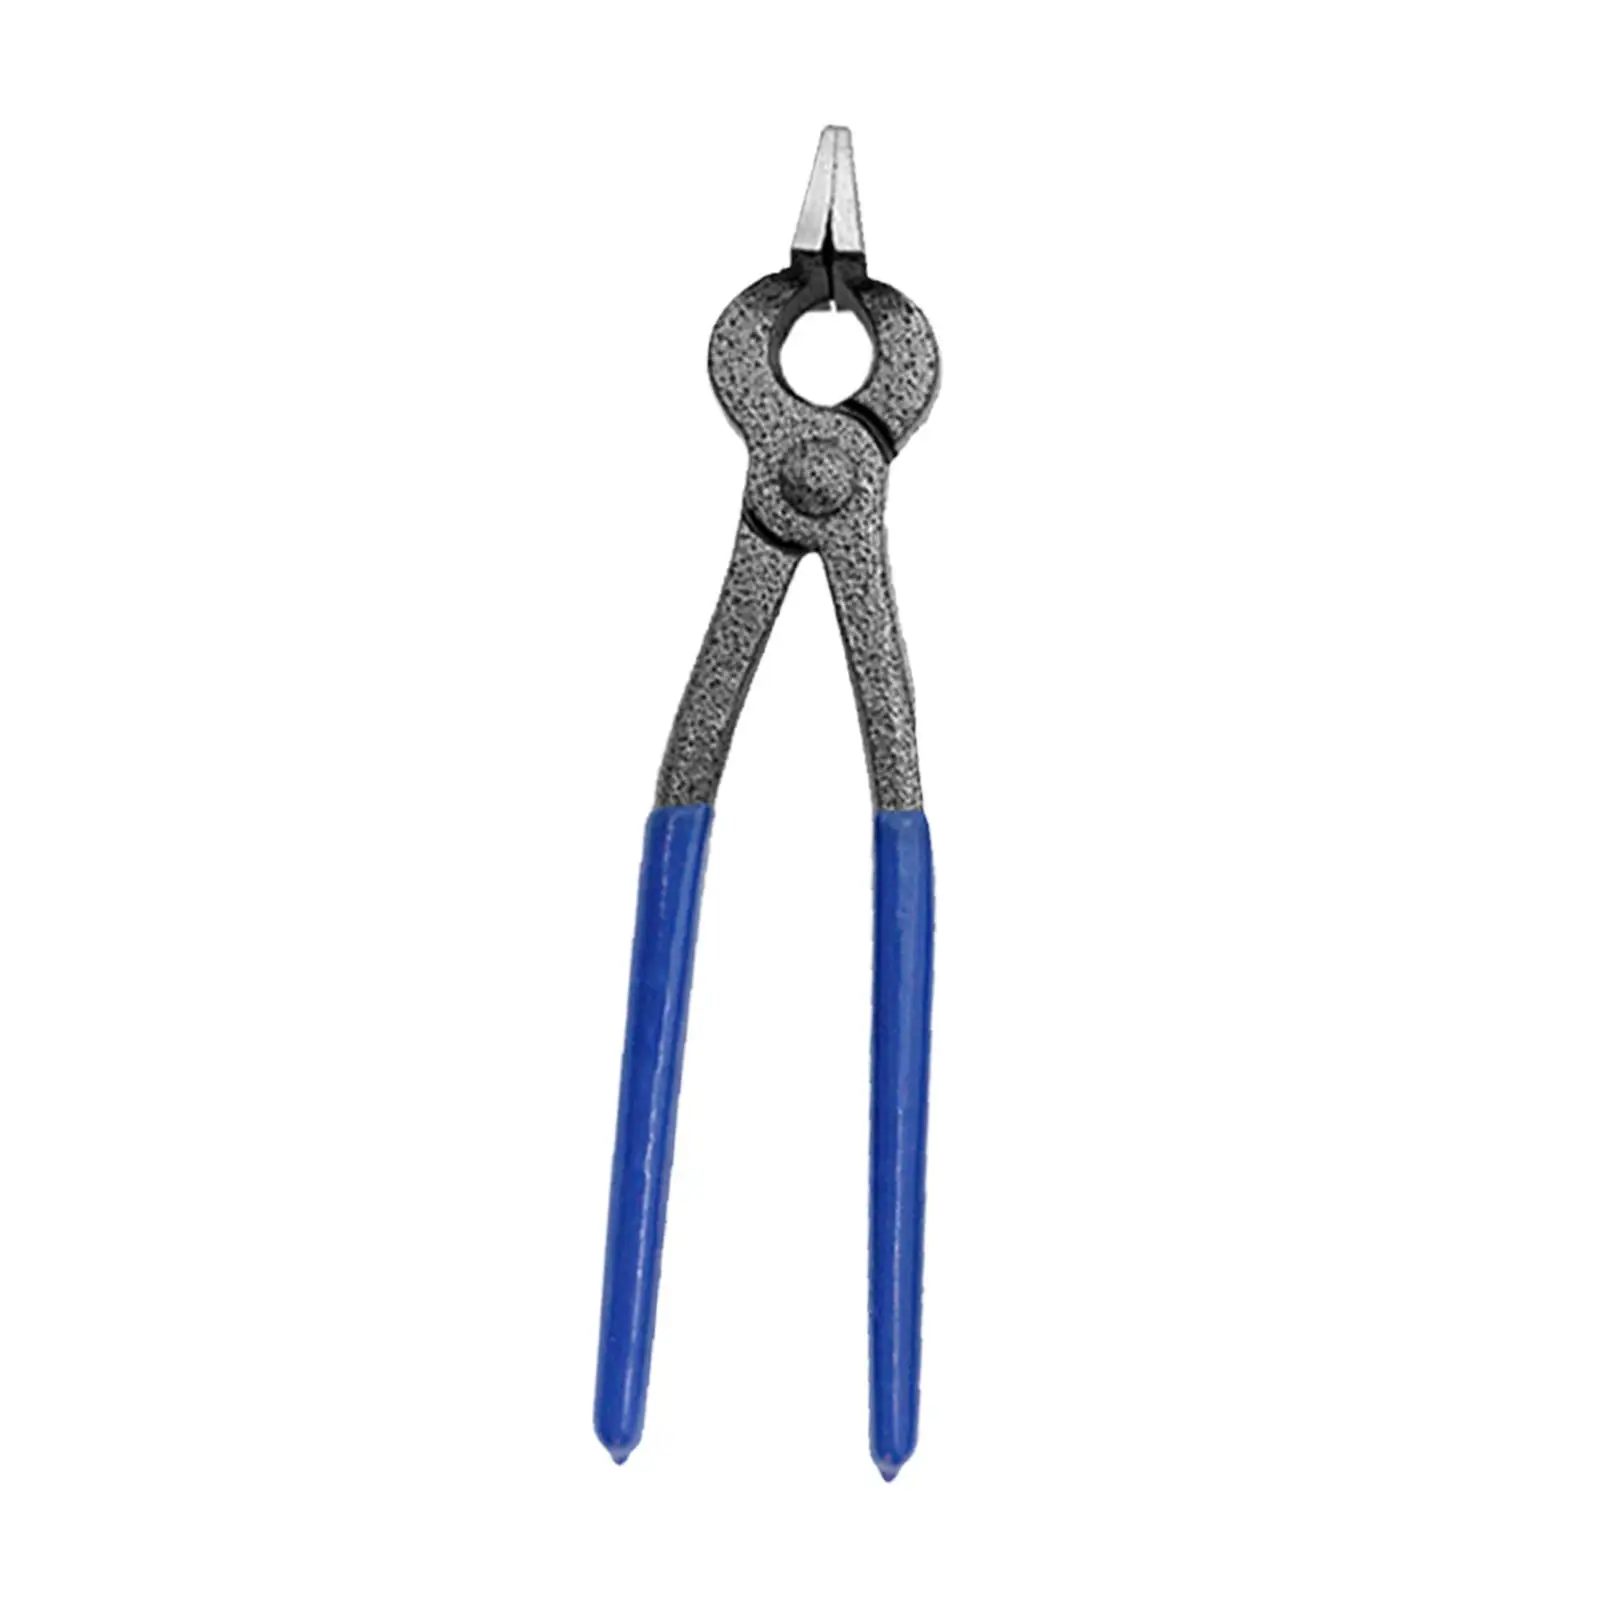 Leather Clamp Pliers Leathercraft Tool Making Pliers Hand Pliers Craft Flat